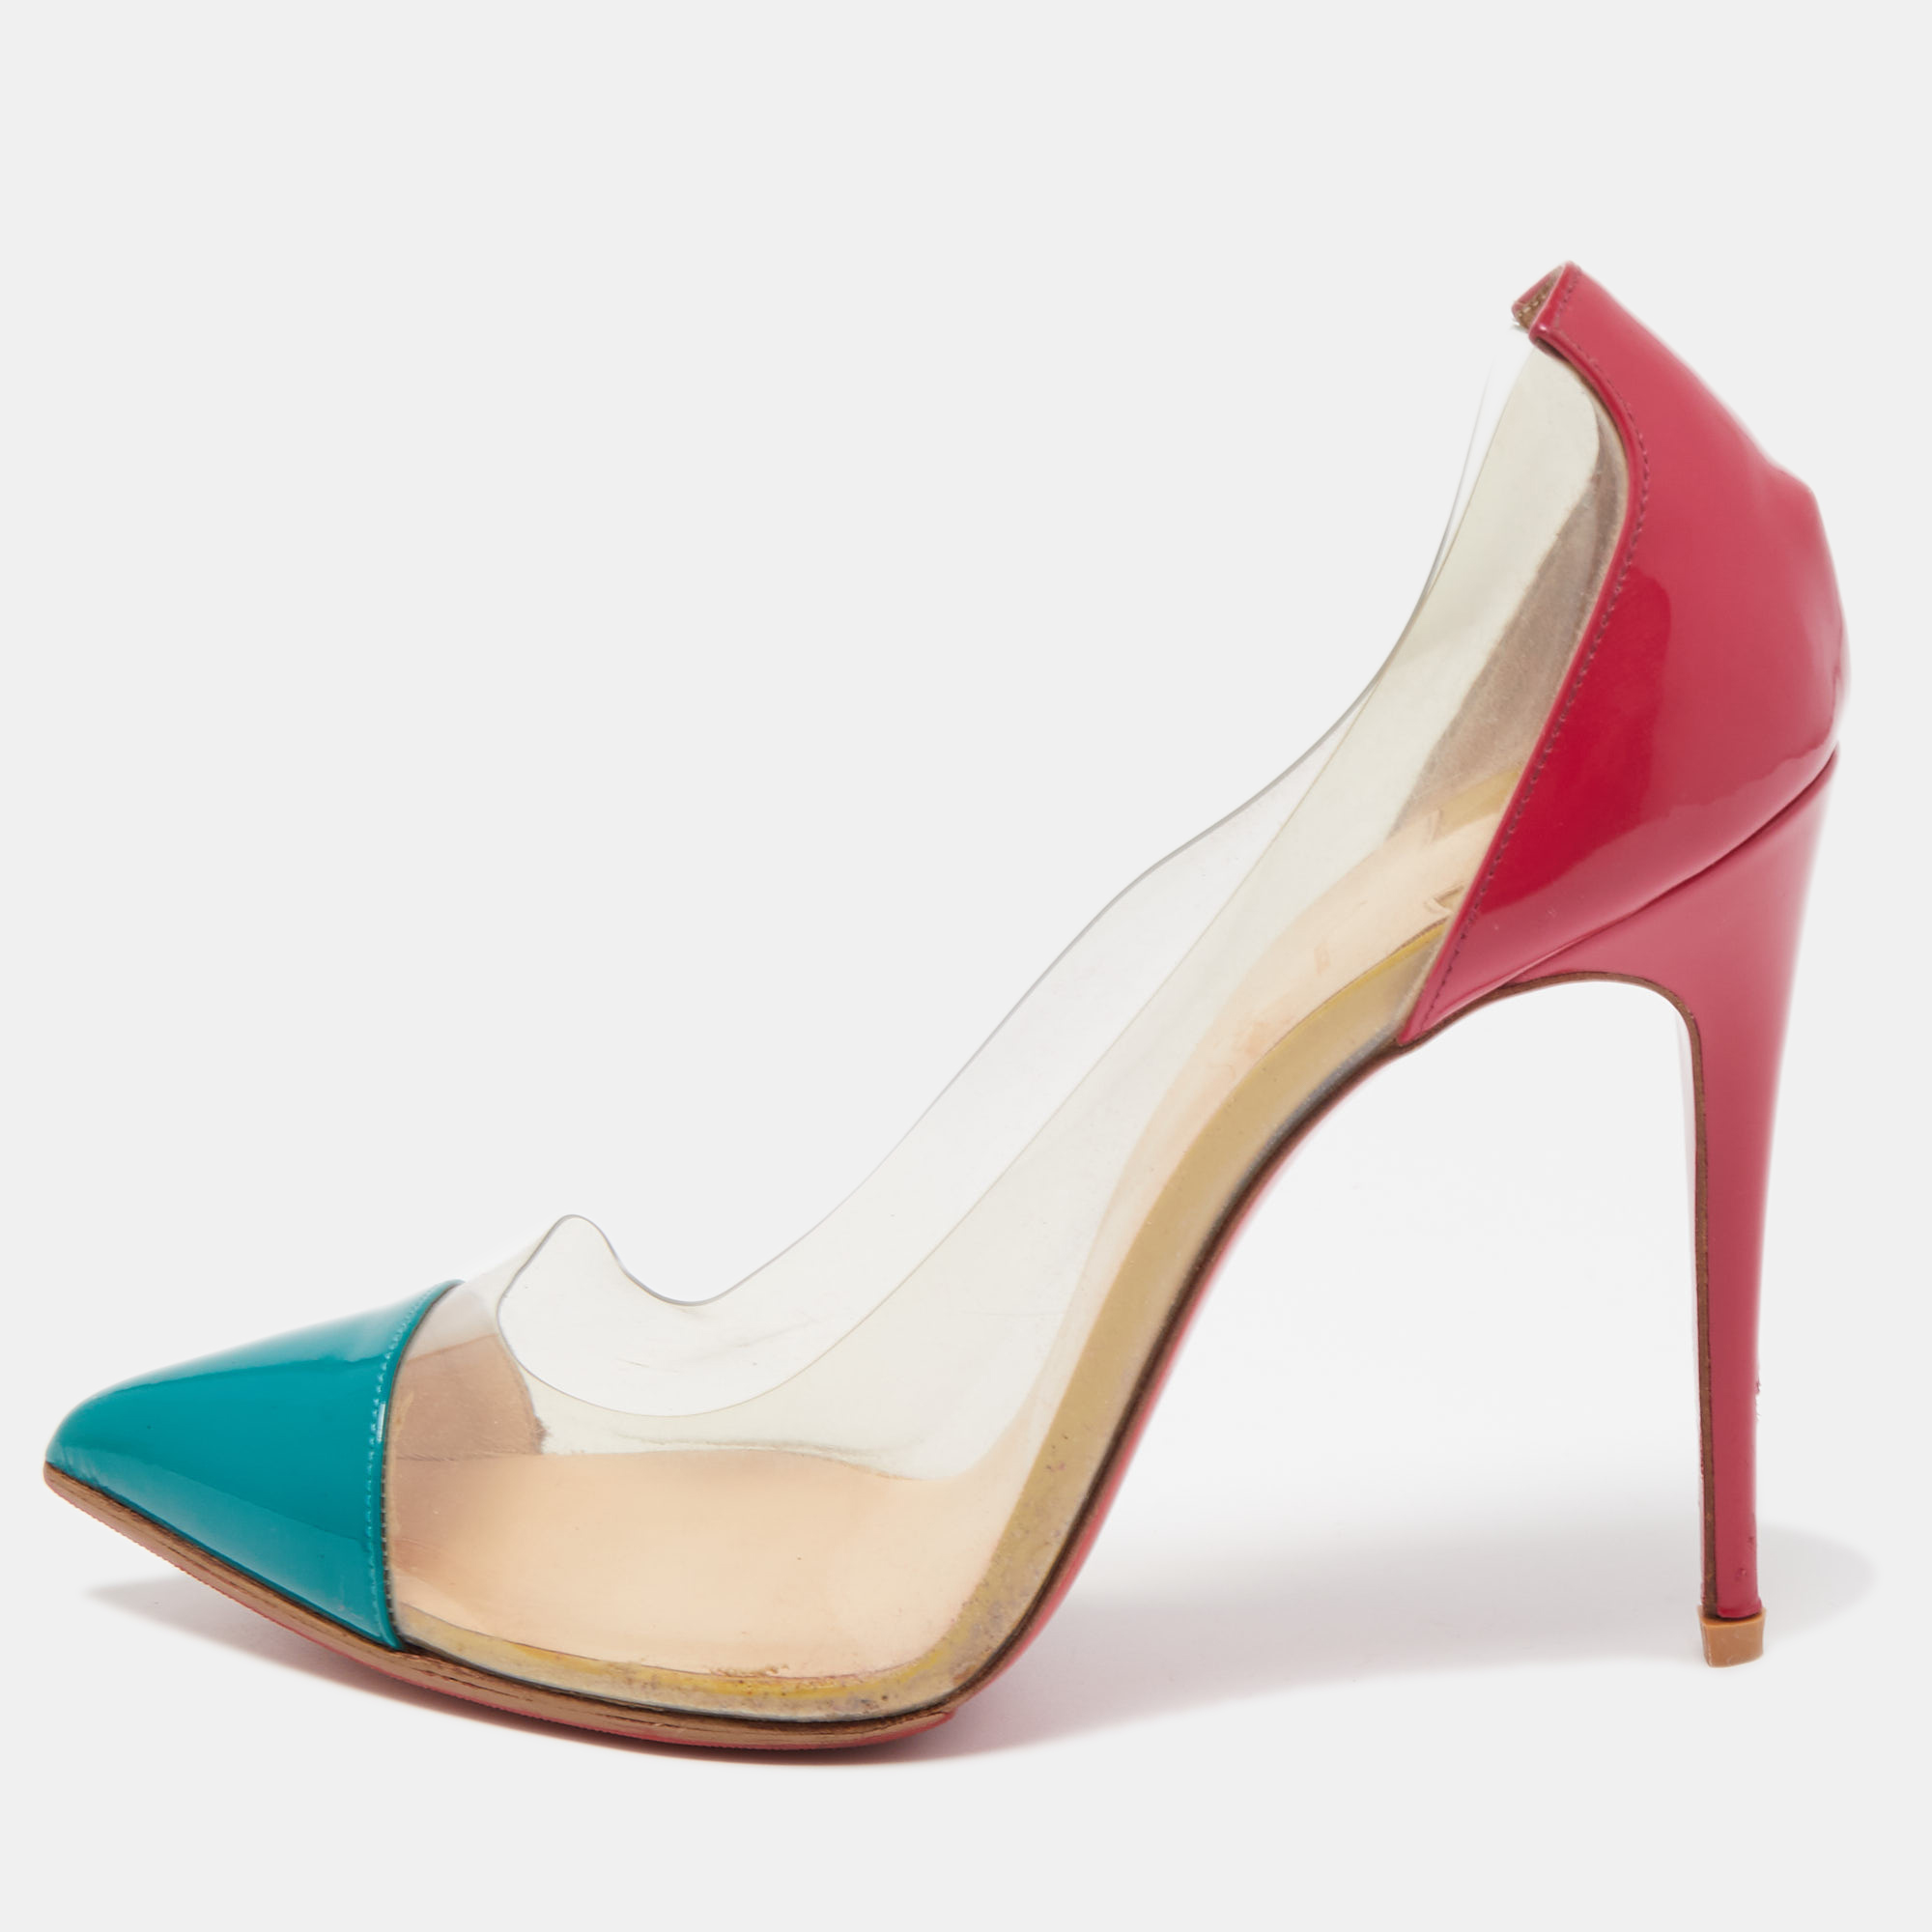 Pre-owned Christian Louboutin Multicolor Patent And Pvc Debout Pumps Size 38